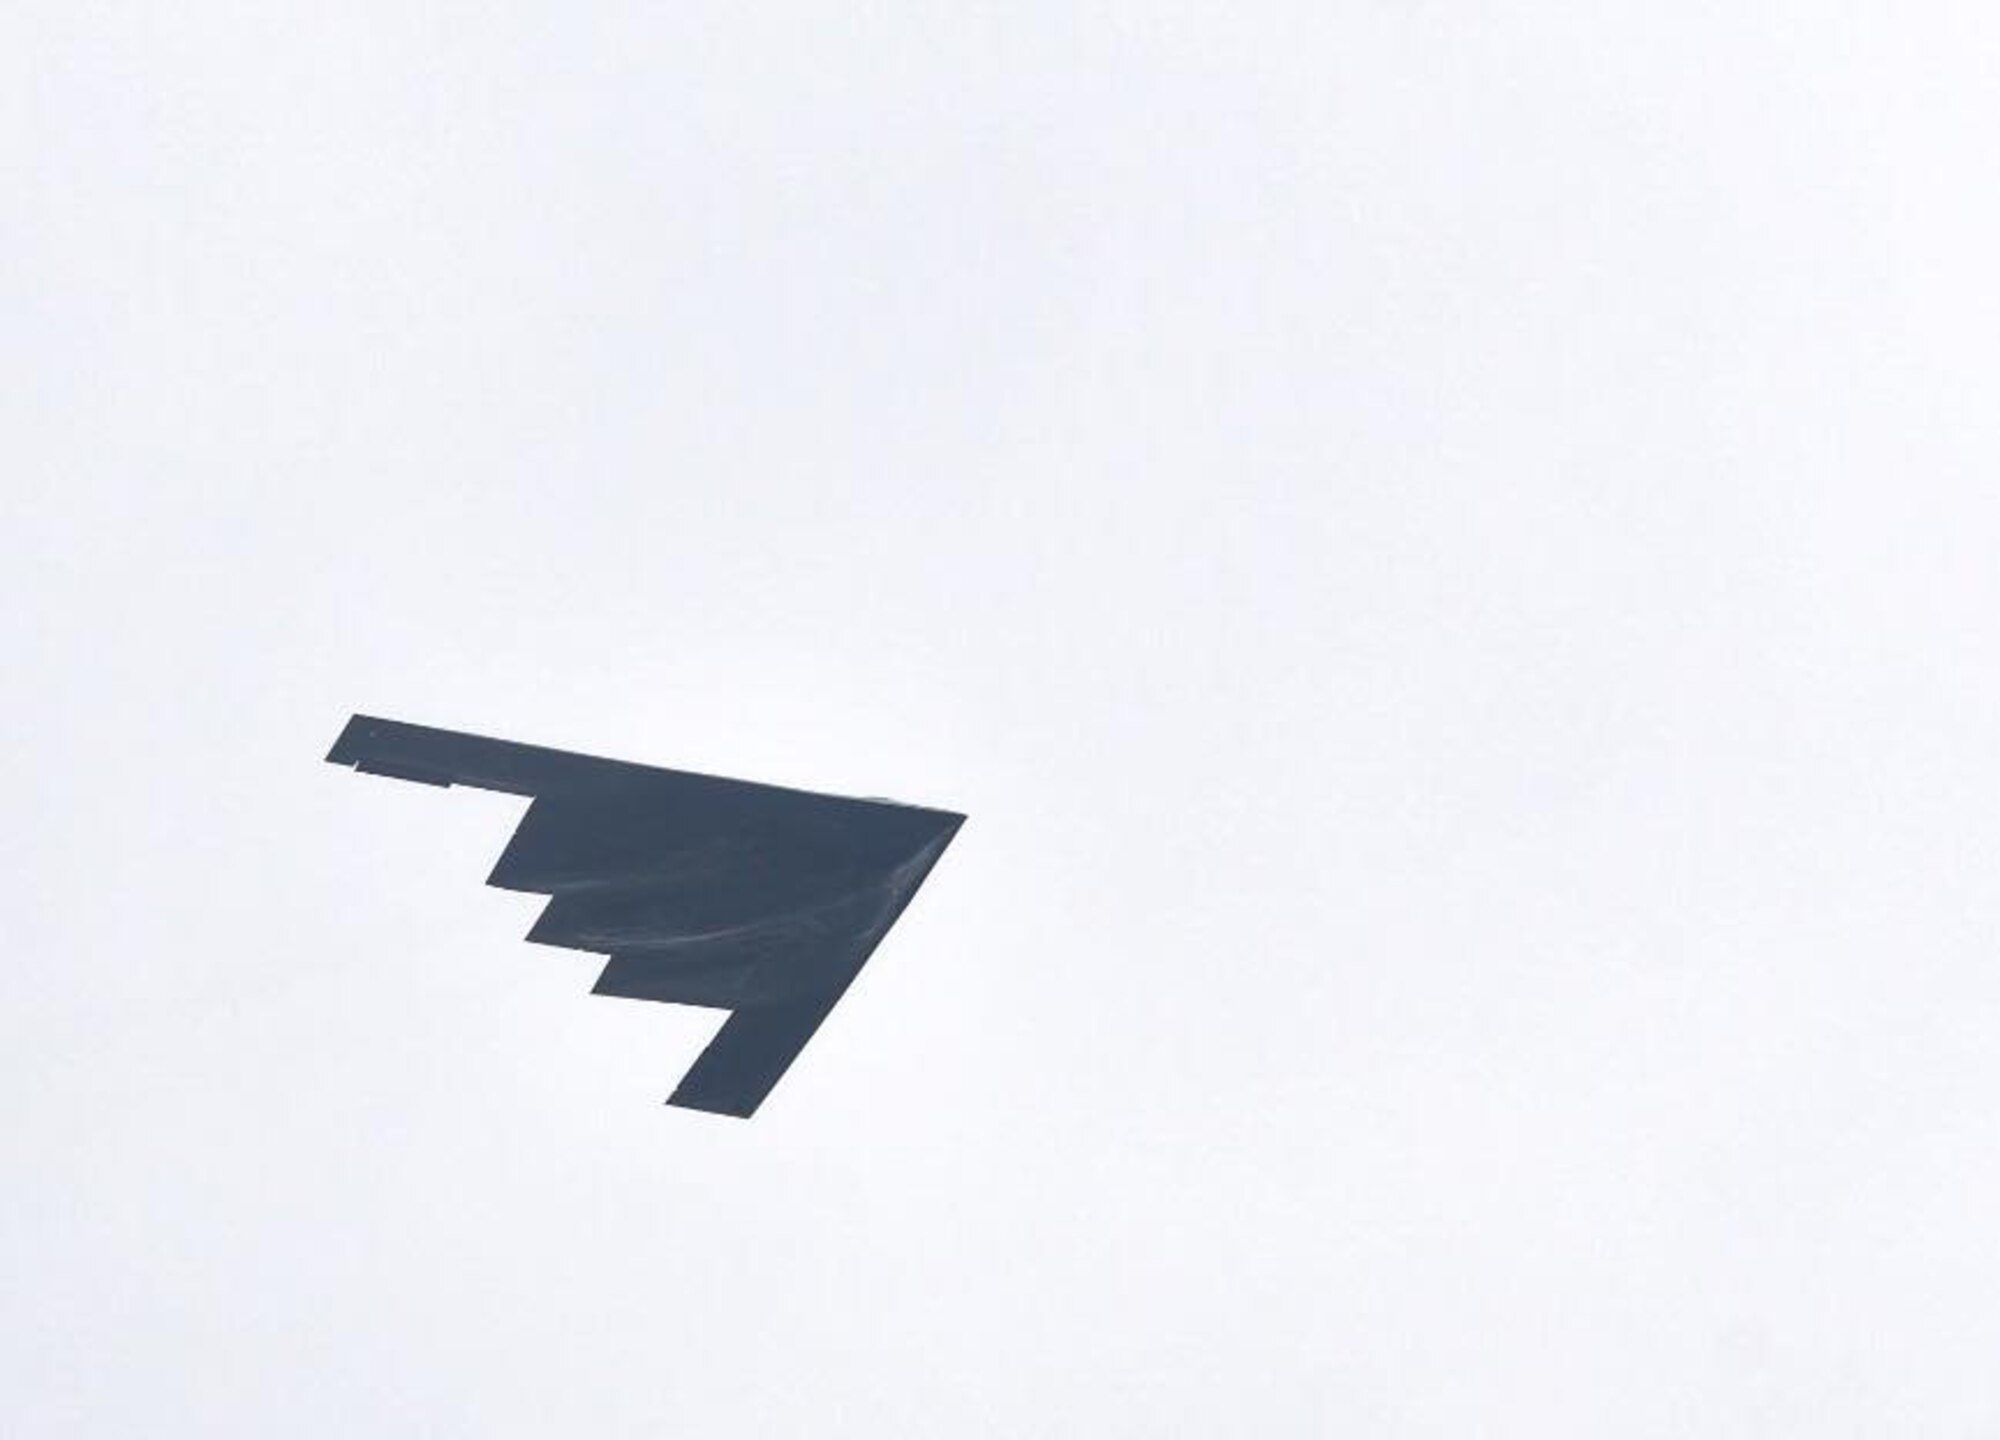 A B-2 Spirit from Whiteman Air Force Base, Missouri, performs a flyover at the Frontiers in Flight Open House and Air Show Sept. 8, 2018, at McConnell AFB, Kansas. The B-2 is a multi-role bomber, capable of delivering both conventional and nuclear munitions. (U.S. Air Force photo by Airman 1st Class Michaela R. Slanchik)